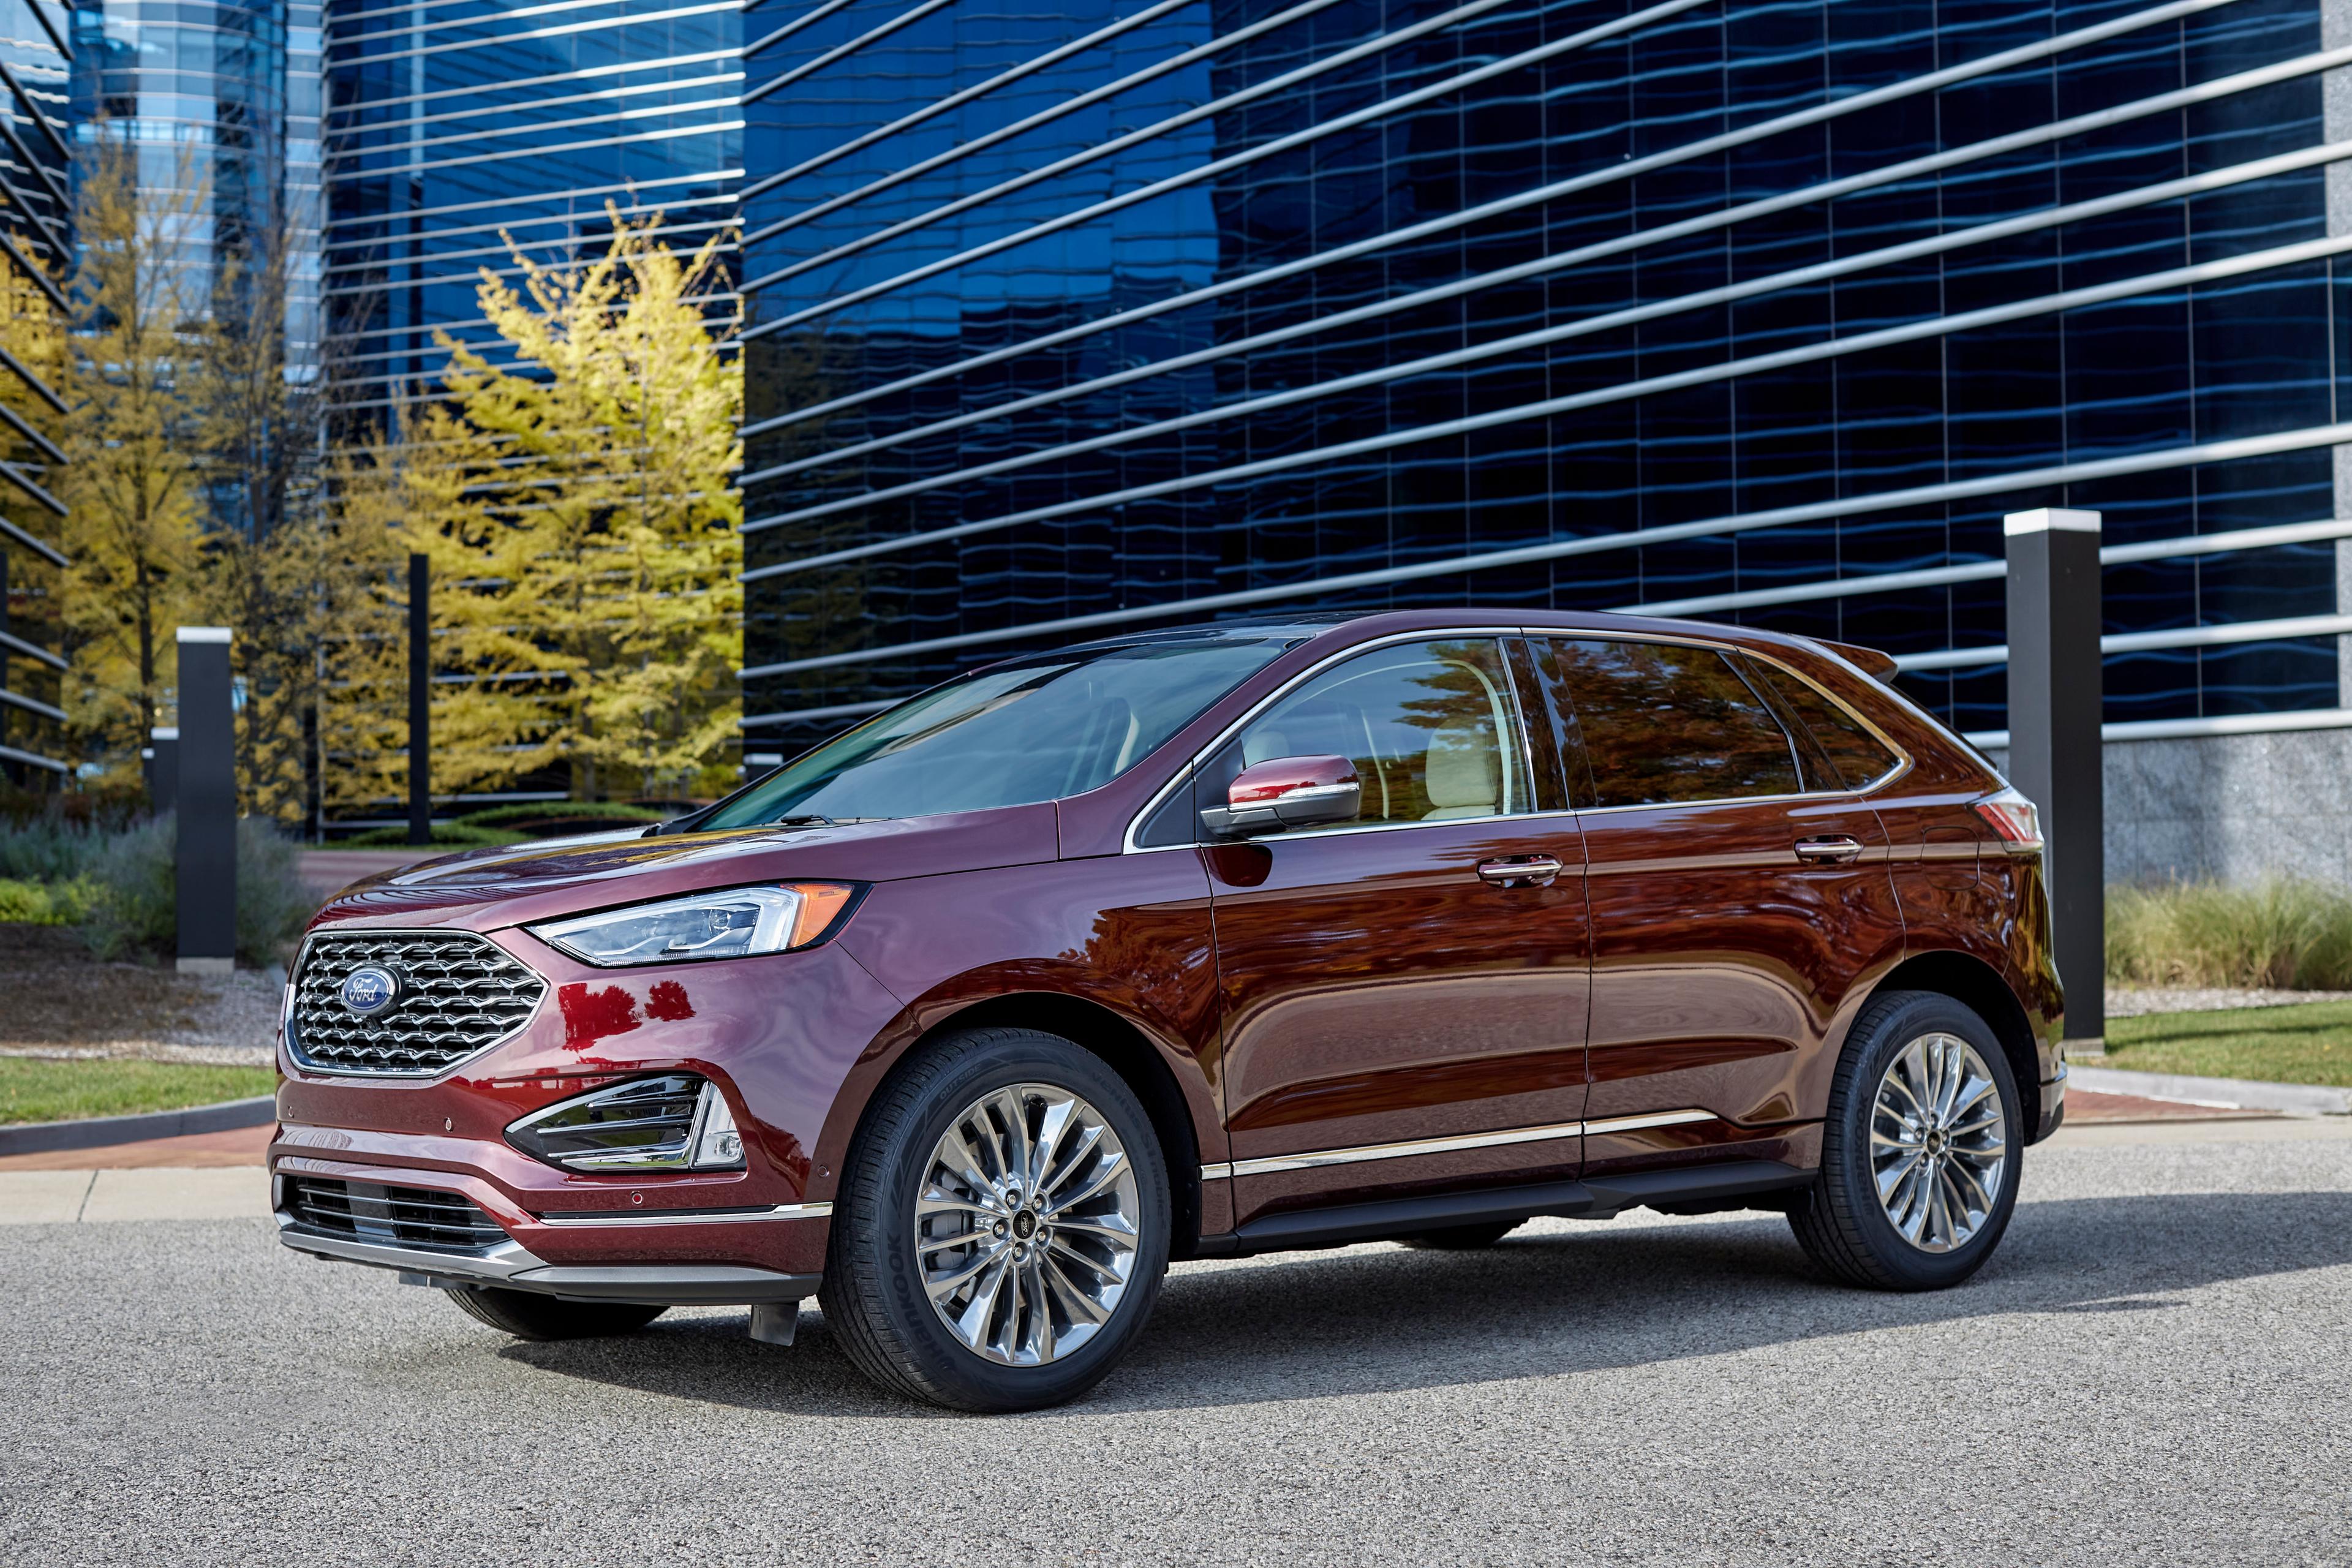 The 2021 Ford Edge has an impressive 41.7 cubic feet of trunk space.